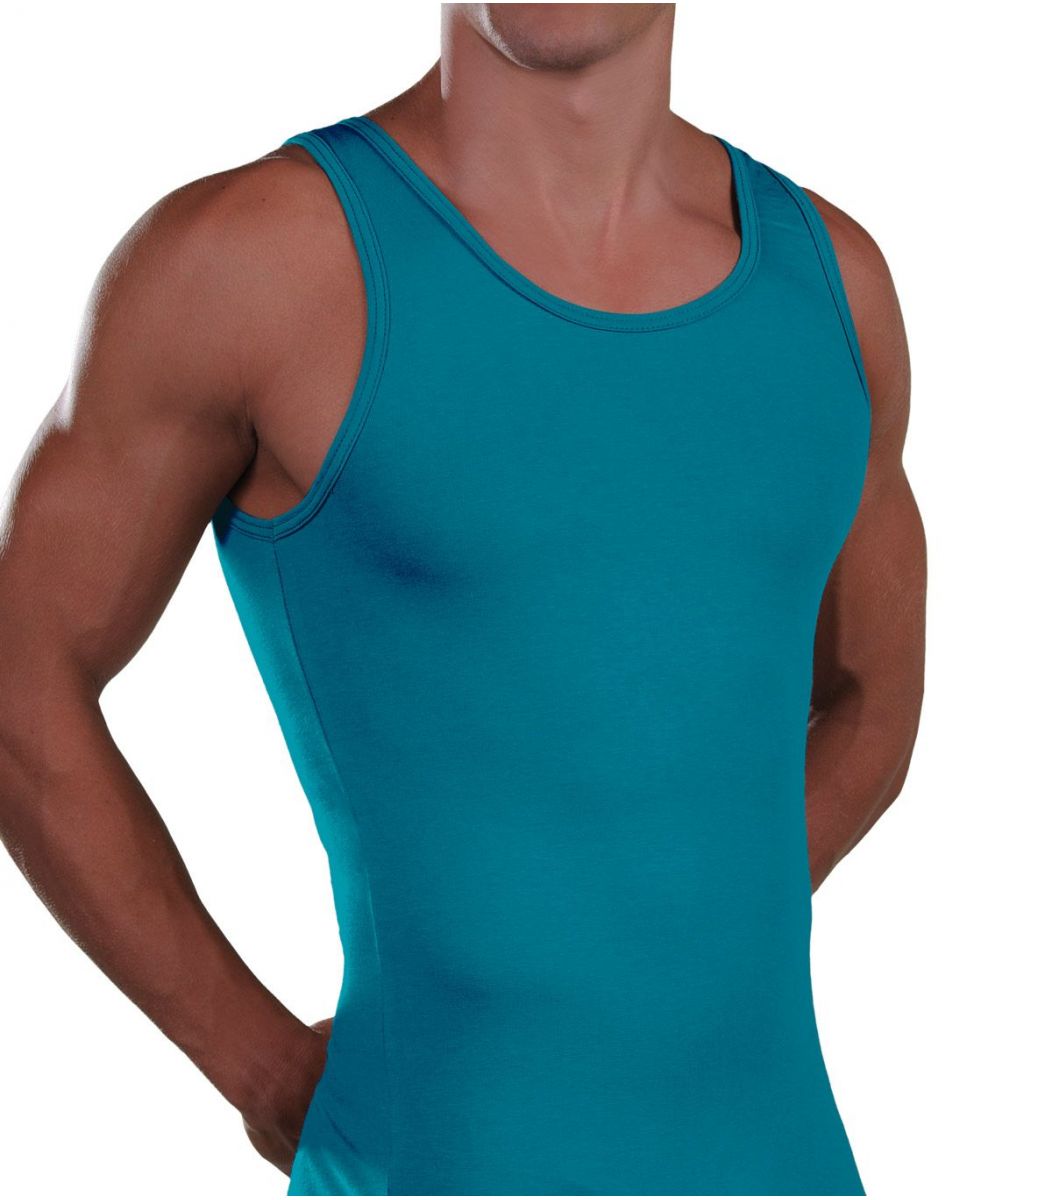  Muscle Top T-Shirt Lord Tank Top, micromodal 1113-6